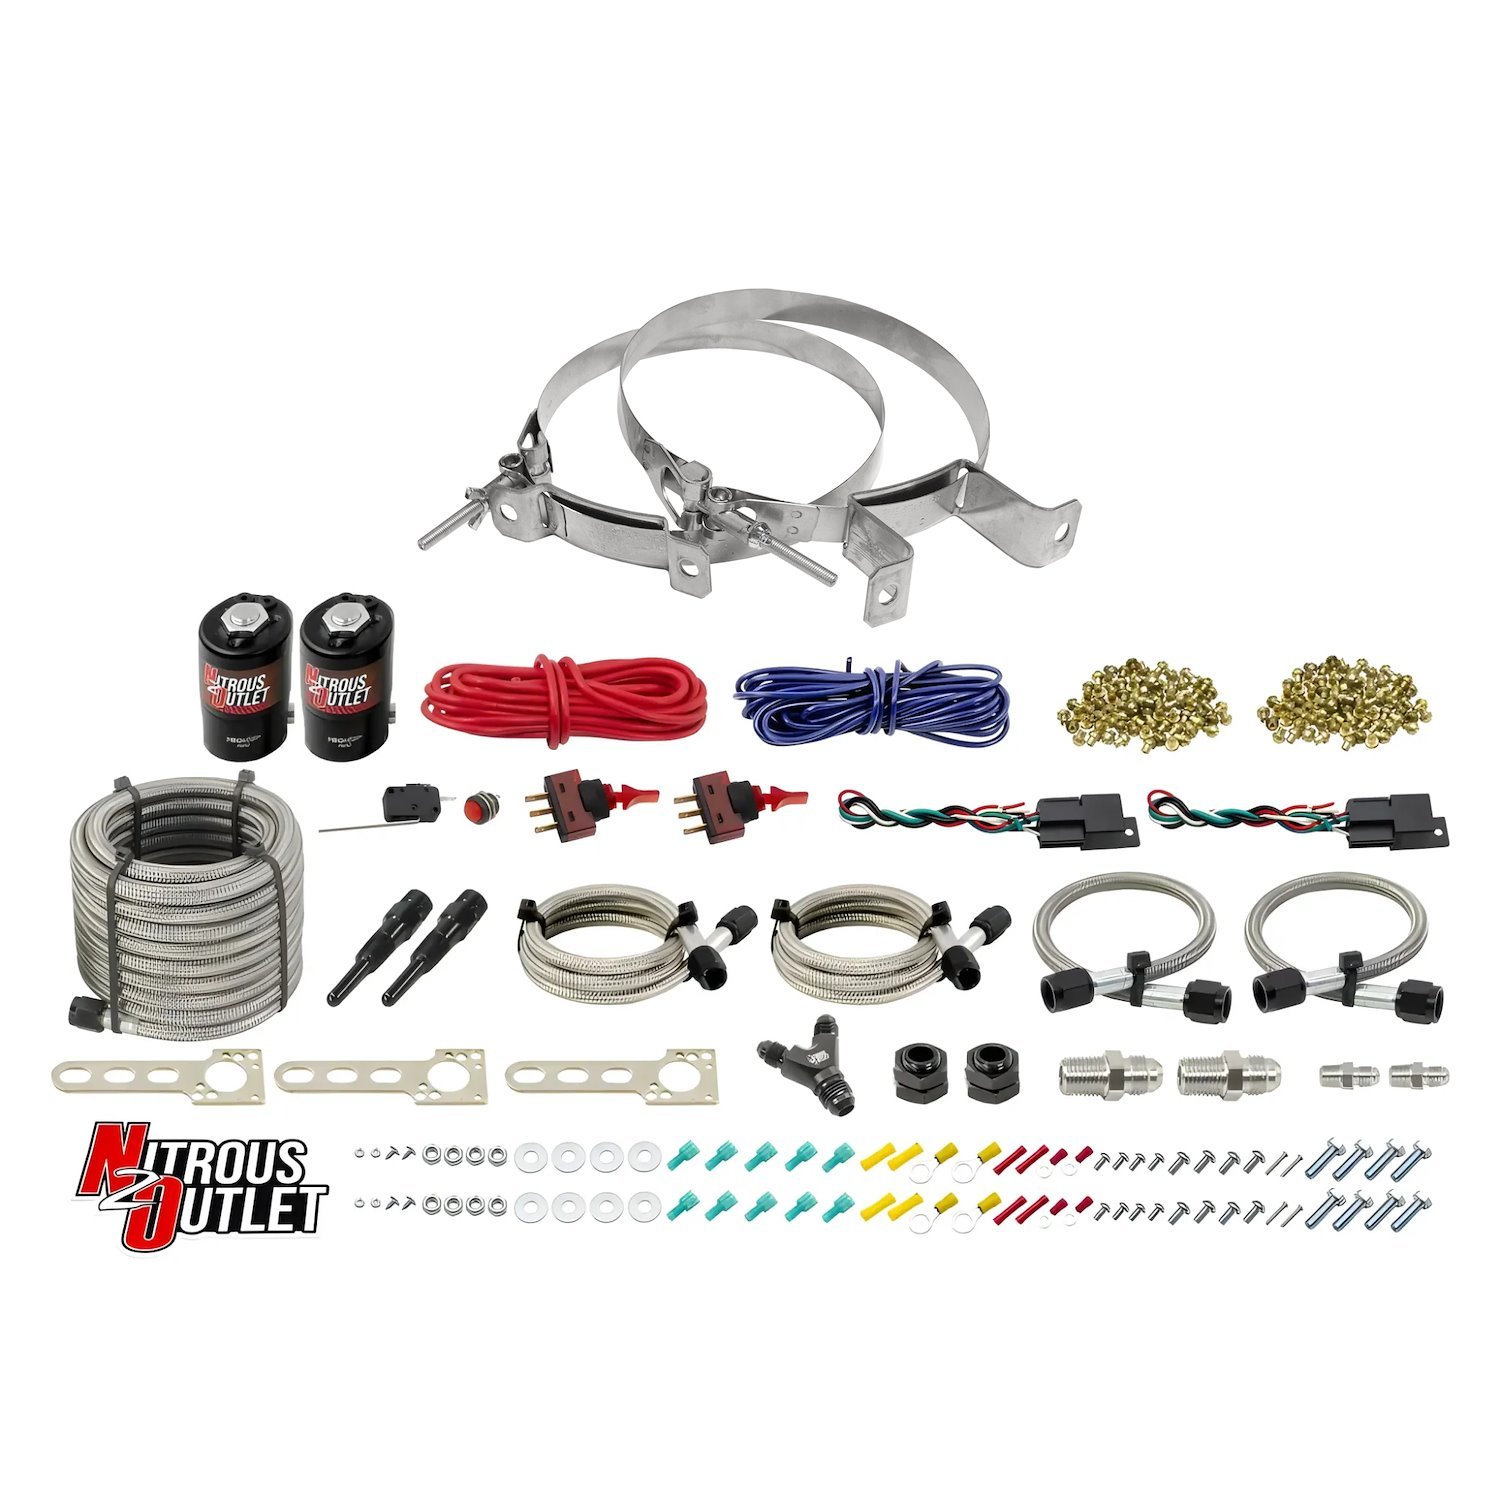 00-10207-00 Universal EFI Dual-Stage Dry Single-Nozzle System, 35-200HP, No Bottle